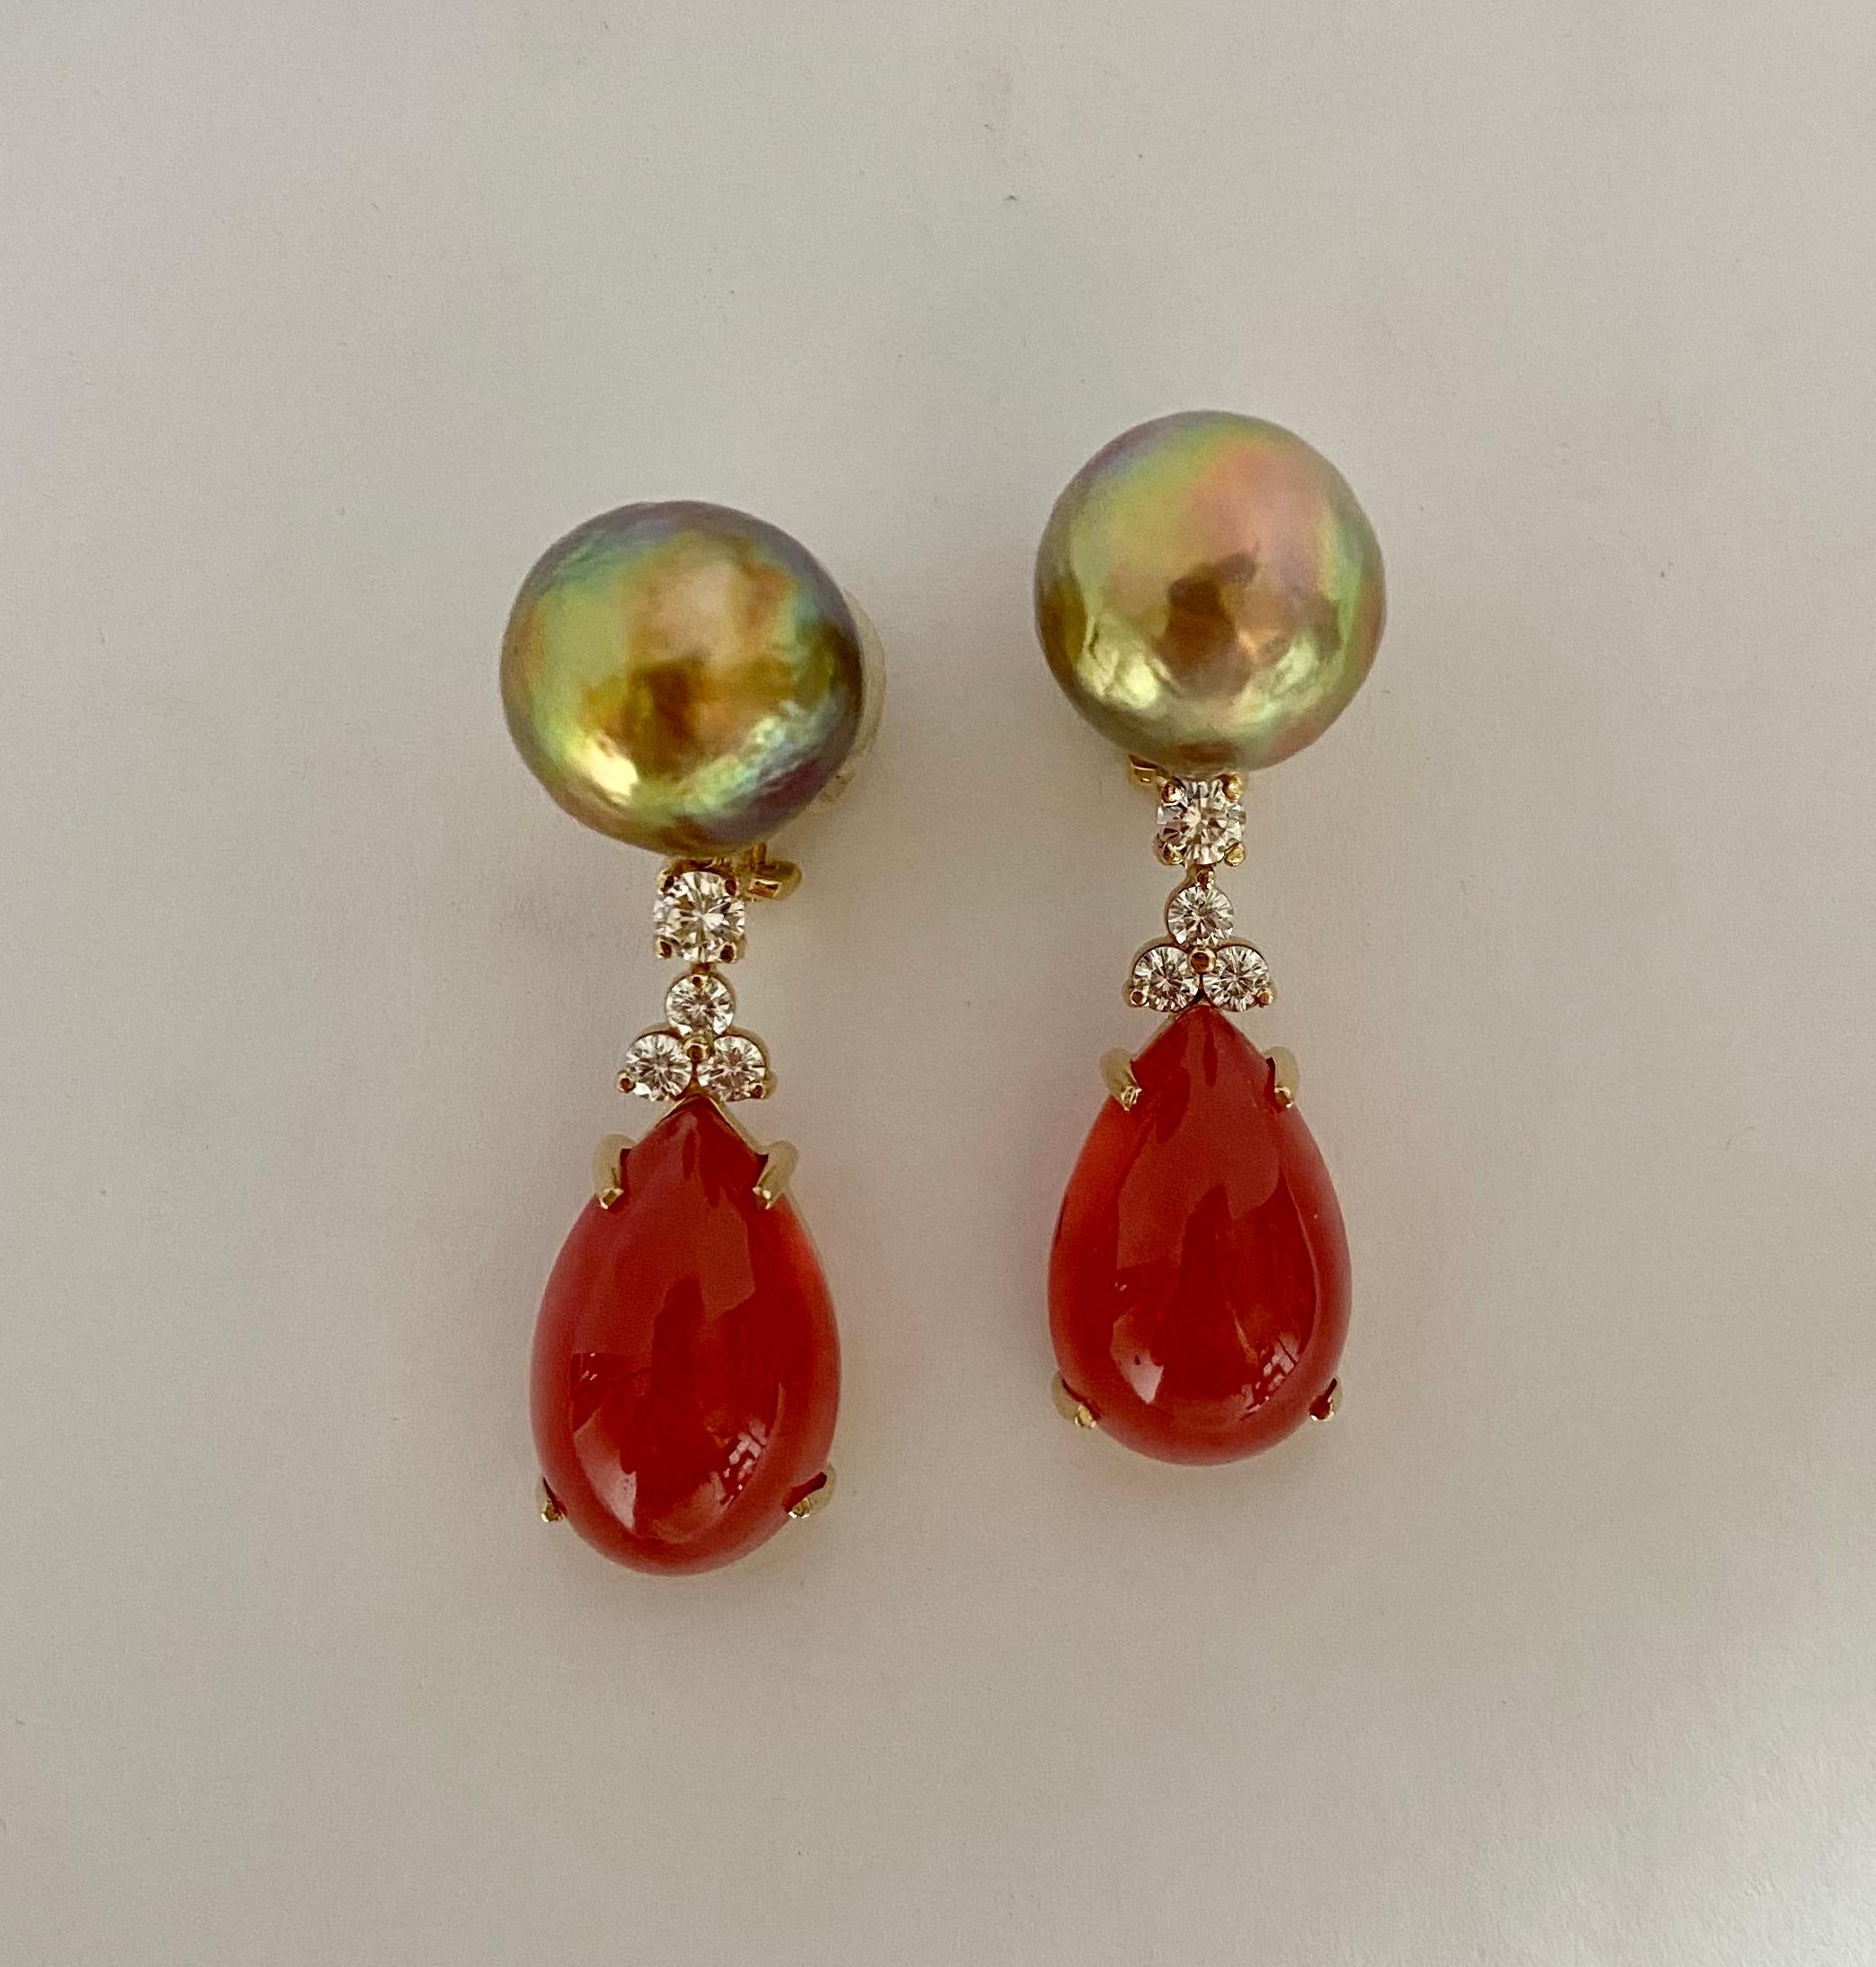 Gem quality rhodochrosite cabochons are featured in these arresting dangle earrings.  The gems (origin: Peru) are truly spectacular examples of the mineral.  It's almost impossible to describe the rich color-maybe strawberry jam?  The rhodochrosite